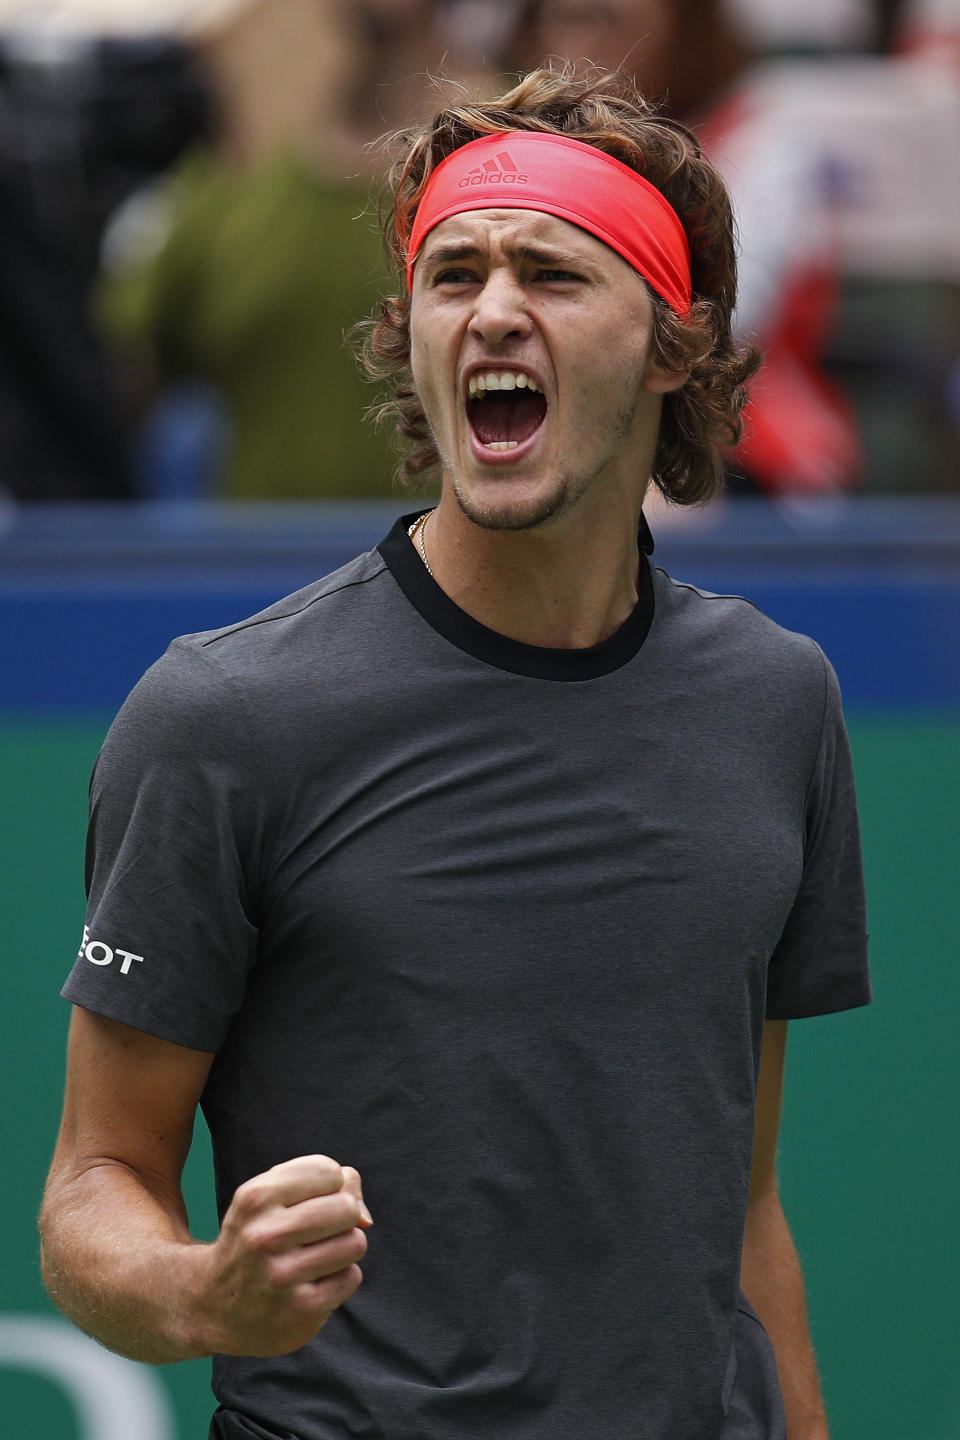 Alexander Zverev of Germany reacts after scoring a break point against Kyle Edmund of Britain during their men's singles quarterfinals match in the Shanghai Masters tennis tournament at Qizhong Forest Sports City Tennis Center in Shanghai, China, Friday, Oct. 12, 2018. (AP Photo/Andy Wong)